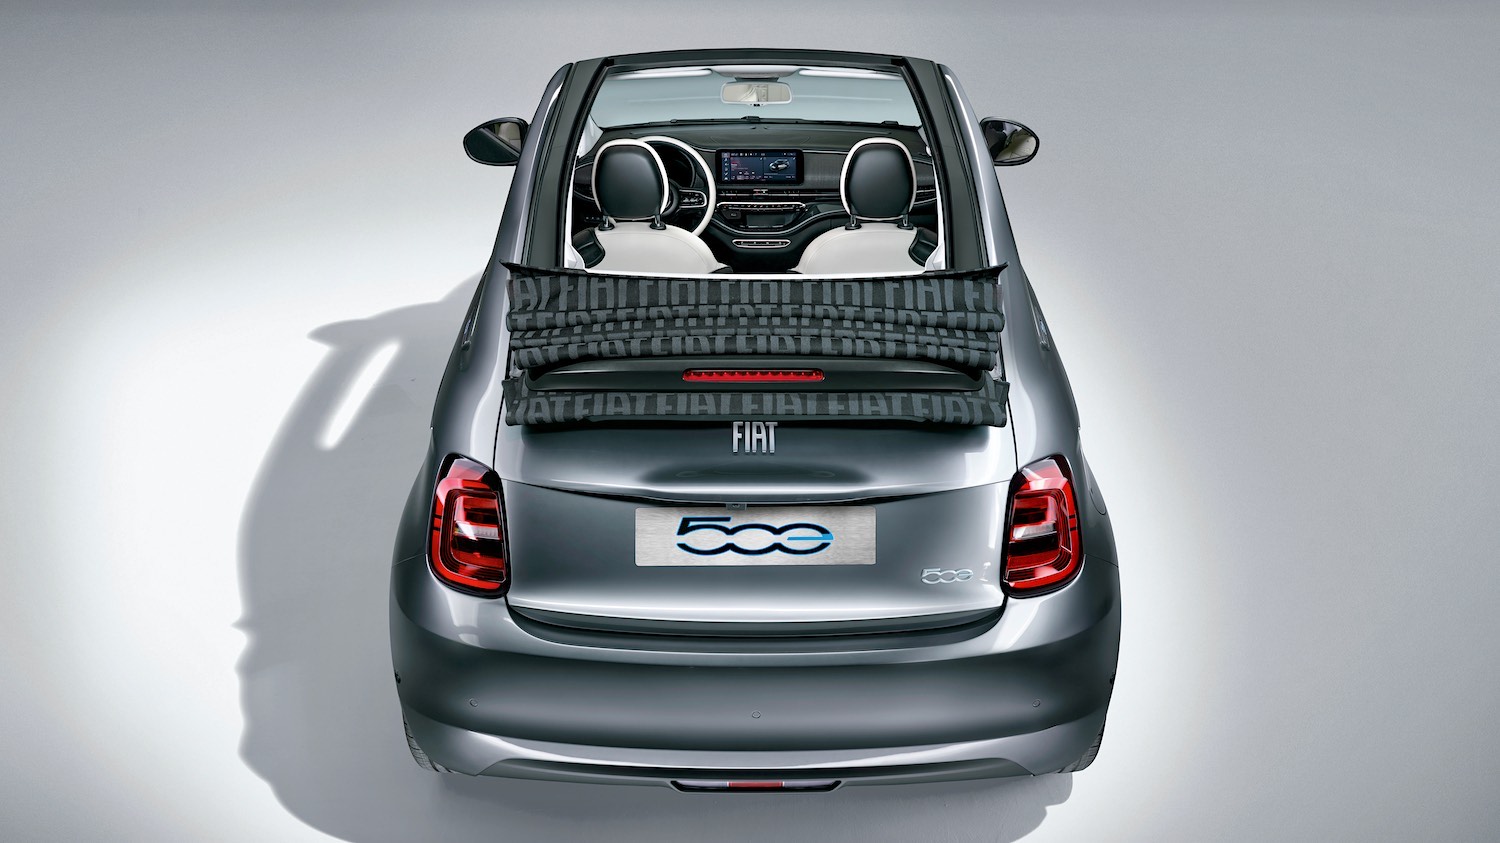 The all-electric Fiat 500e – Bellissima - Women's World Car of the Year